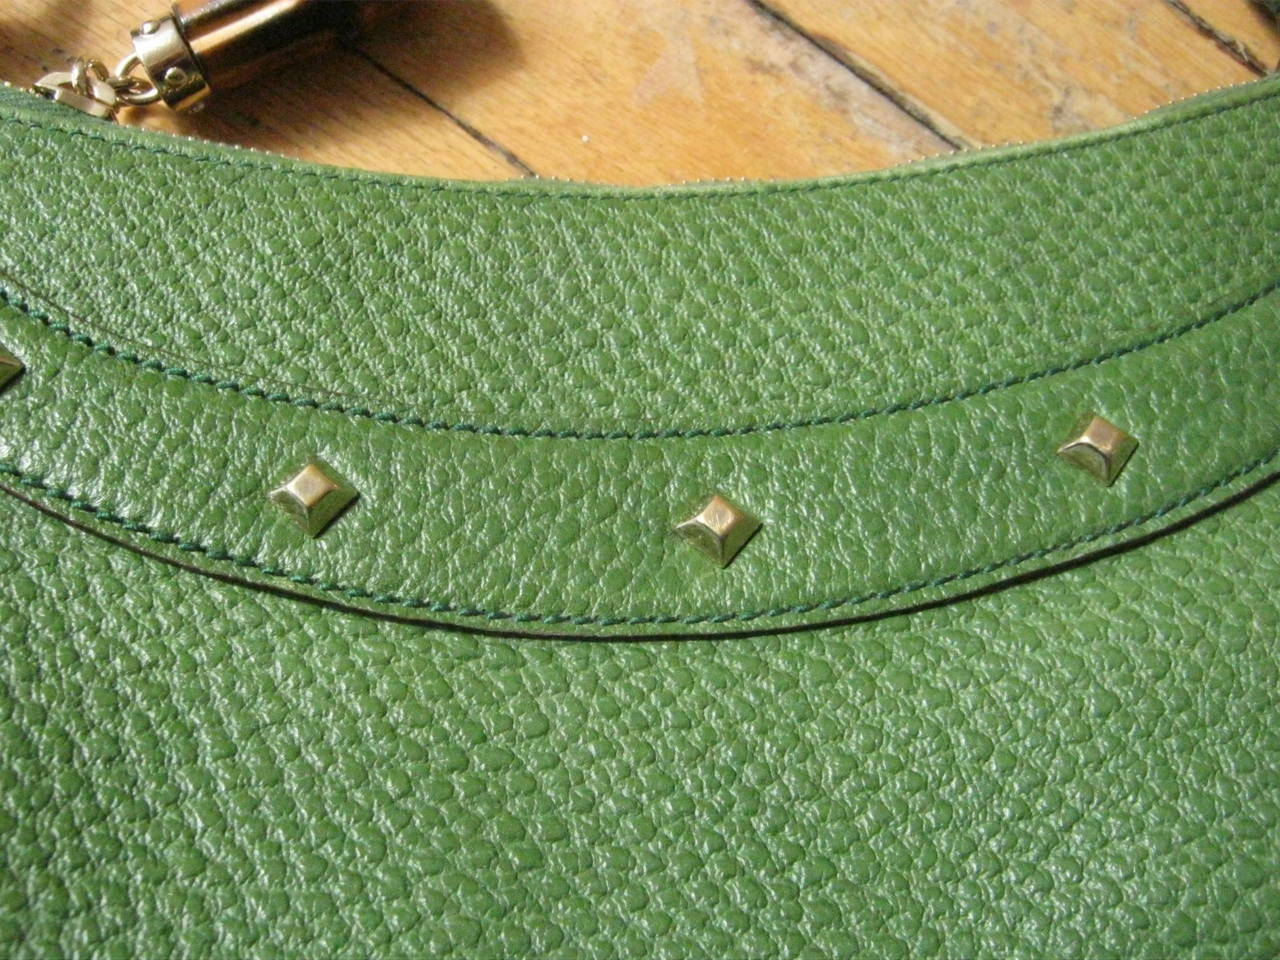 This hobo style Gucci bag made of a beautiful green pebbled leather can be worn for day or evening. There is a line of decorative diamond shaped studs on both sides of the bag and a bamboo handle with a 7